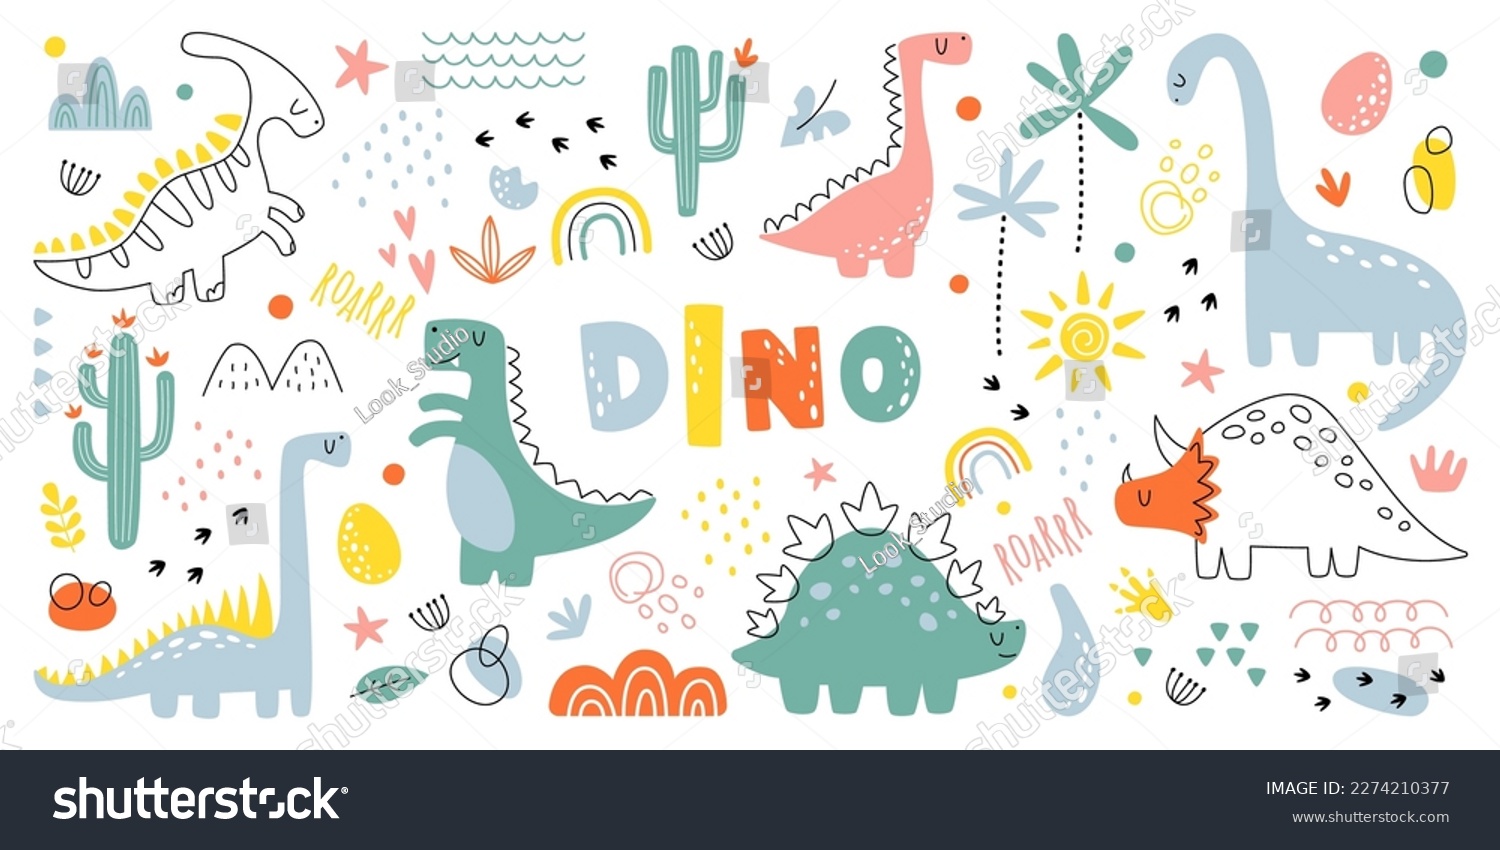 SVG of Hand drawn abstract shapes flat icons set. Minimalistic colorful dinosaur arts. Jurassic period. Rainbow, eggs, footprint and plants decor elements. Color isolated illustrations svg